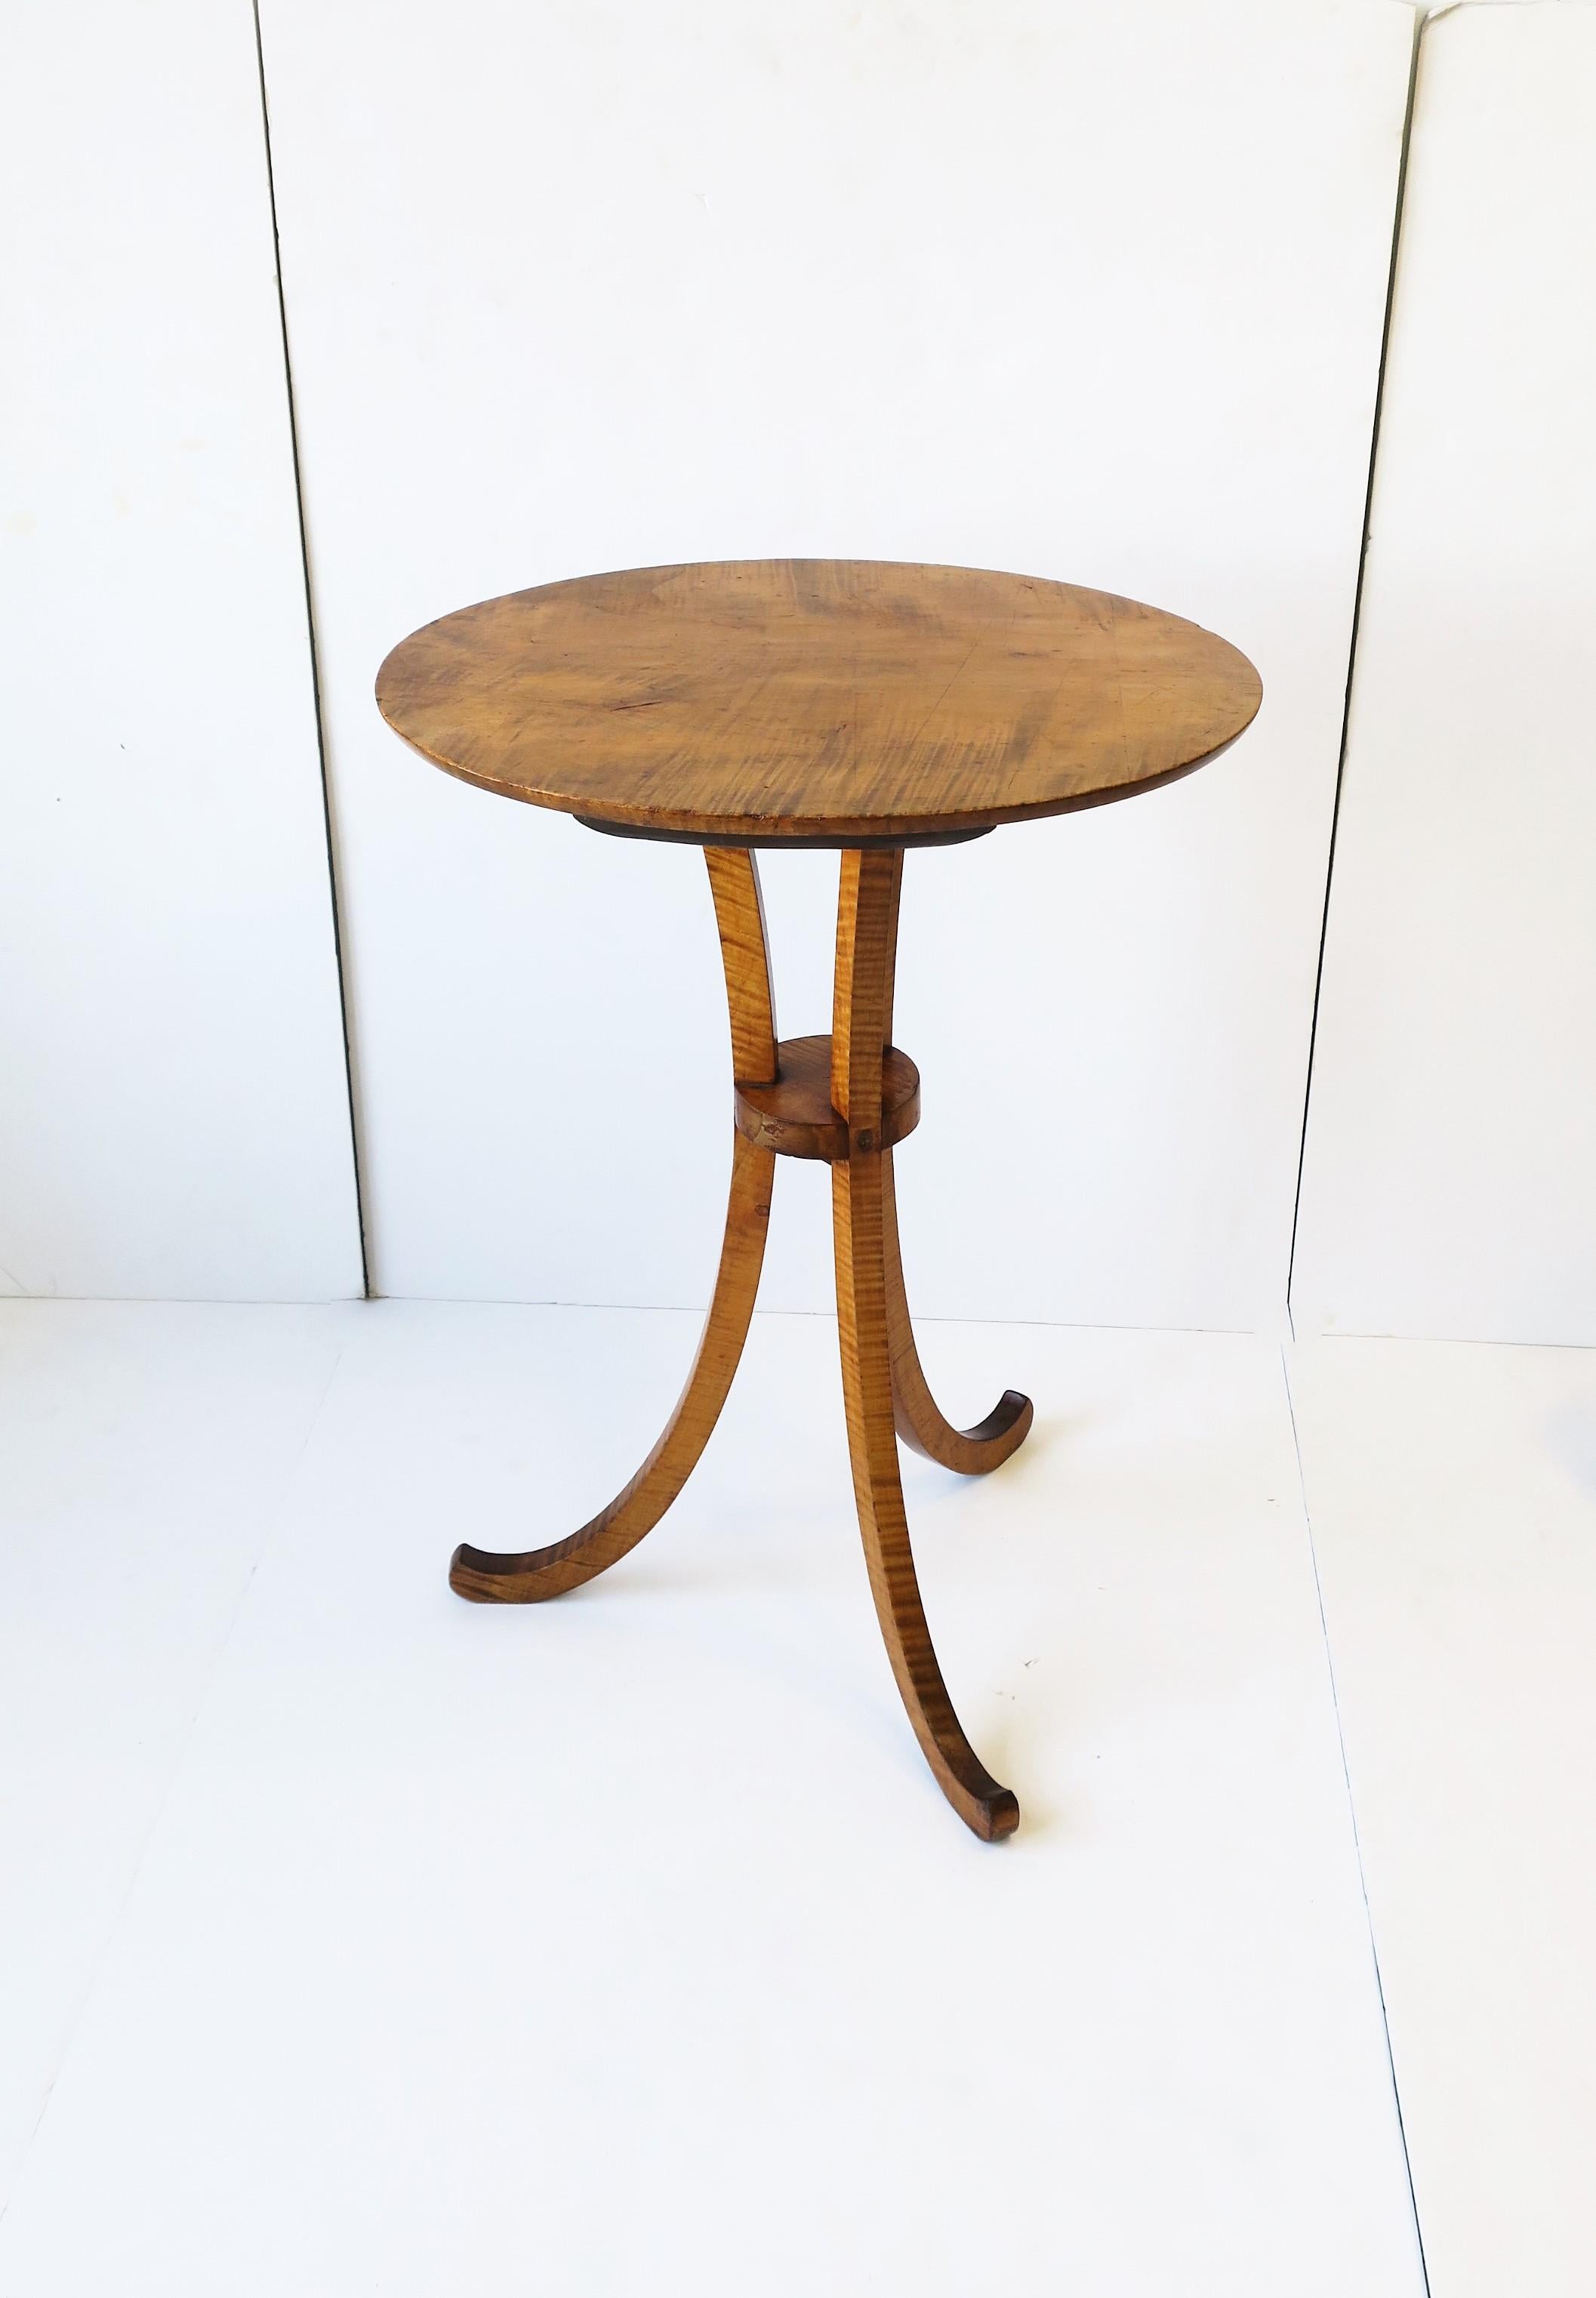 A very beautiful Gueridon maple wood end or side table with oval top and tripod flared leg, circa 20th century. Very good condition as shown in images. Dimensions: 16.38